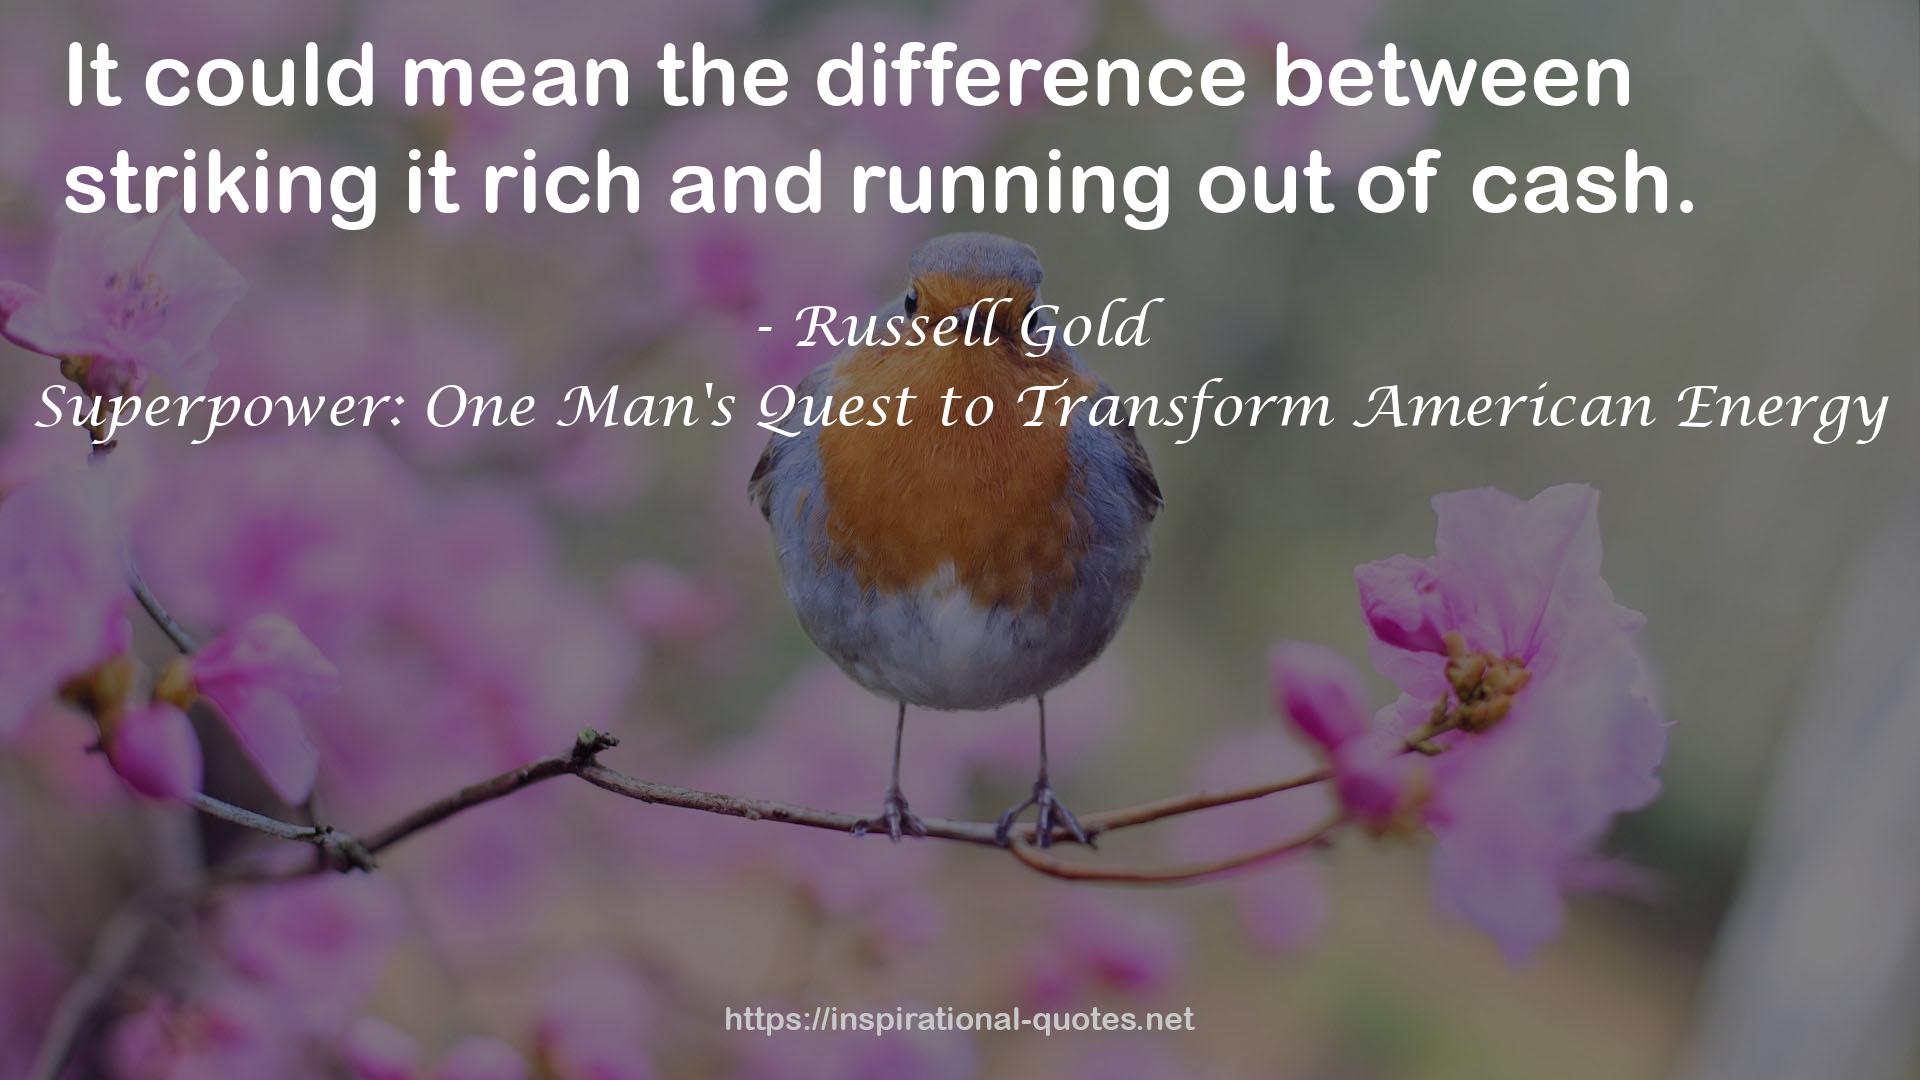 Superpower: One Man's Quest to Transform American Energy QUOTES